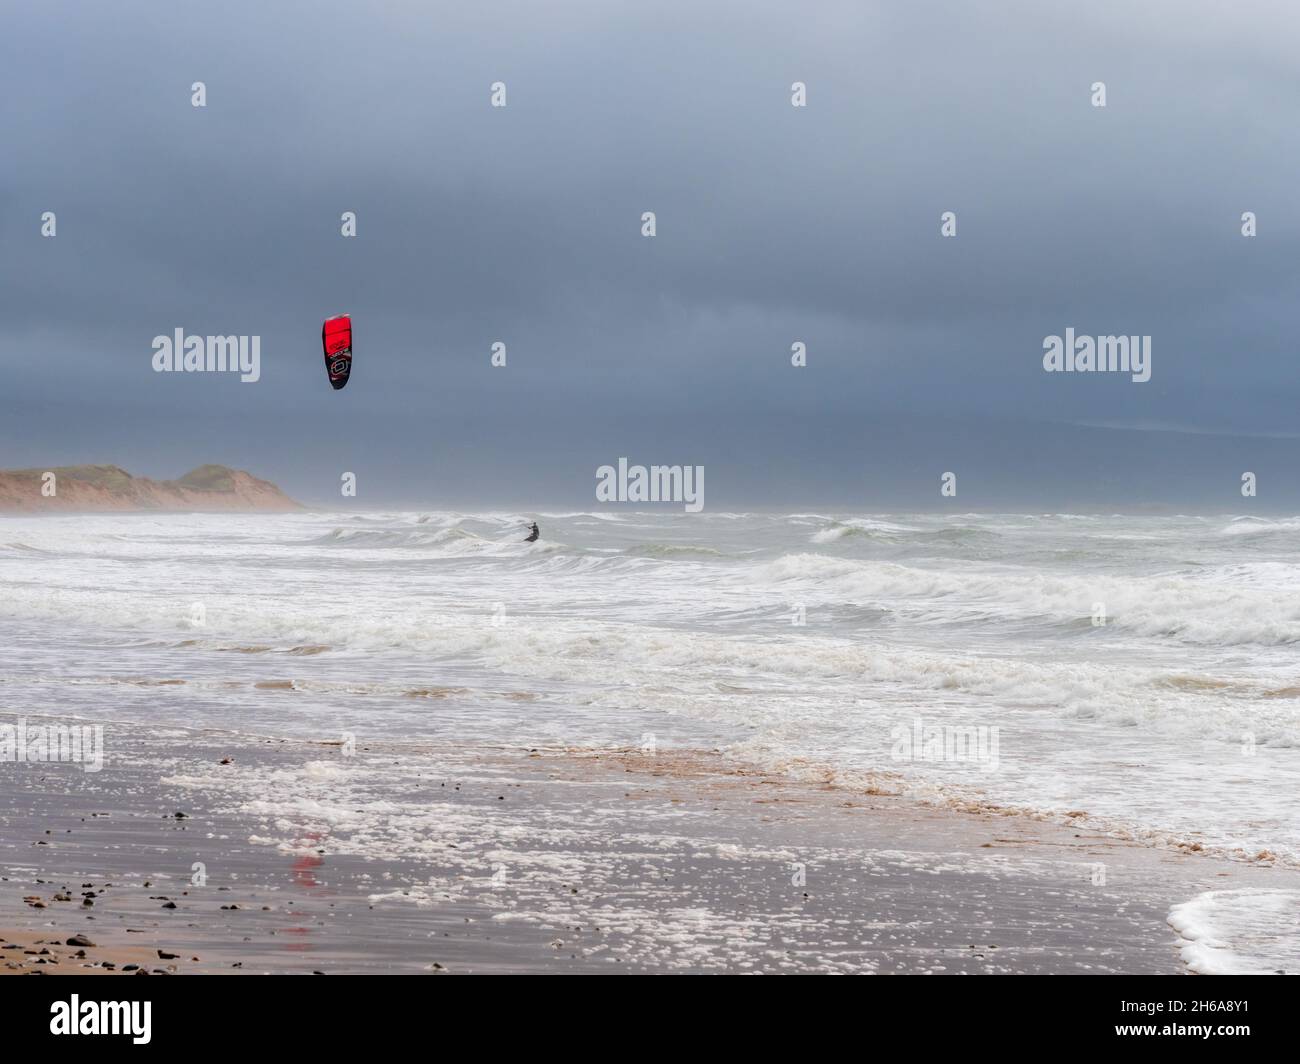 A kitesurfer surfing along the waves on the beach against a stormy, cloudy sky Stock Photo